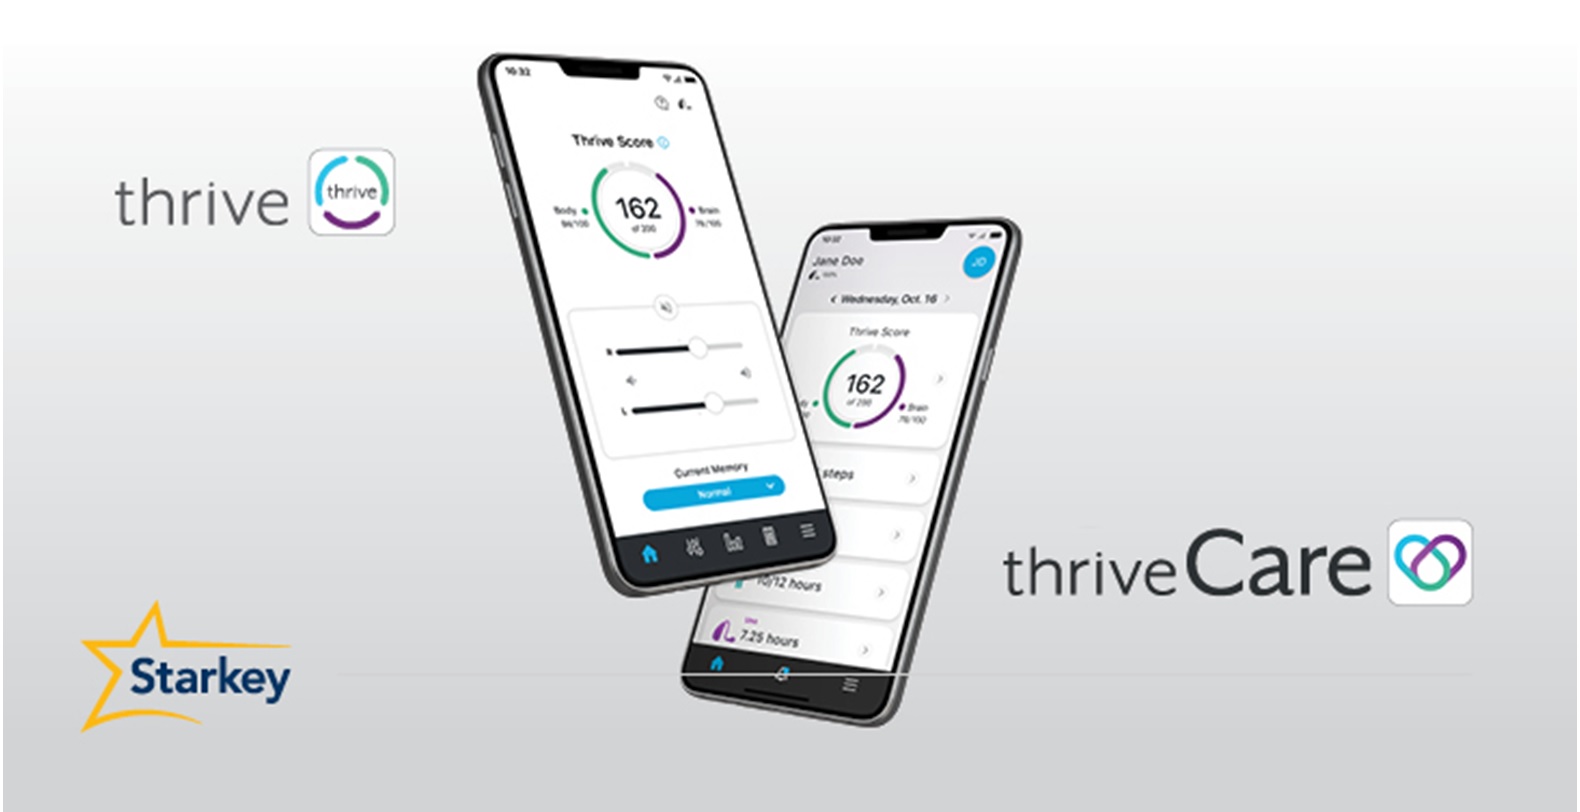 thirve-and-thrive-care-app-bl